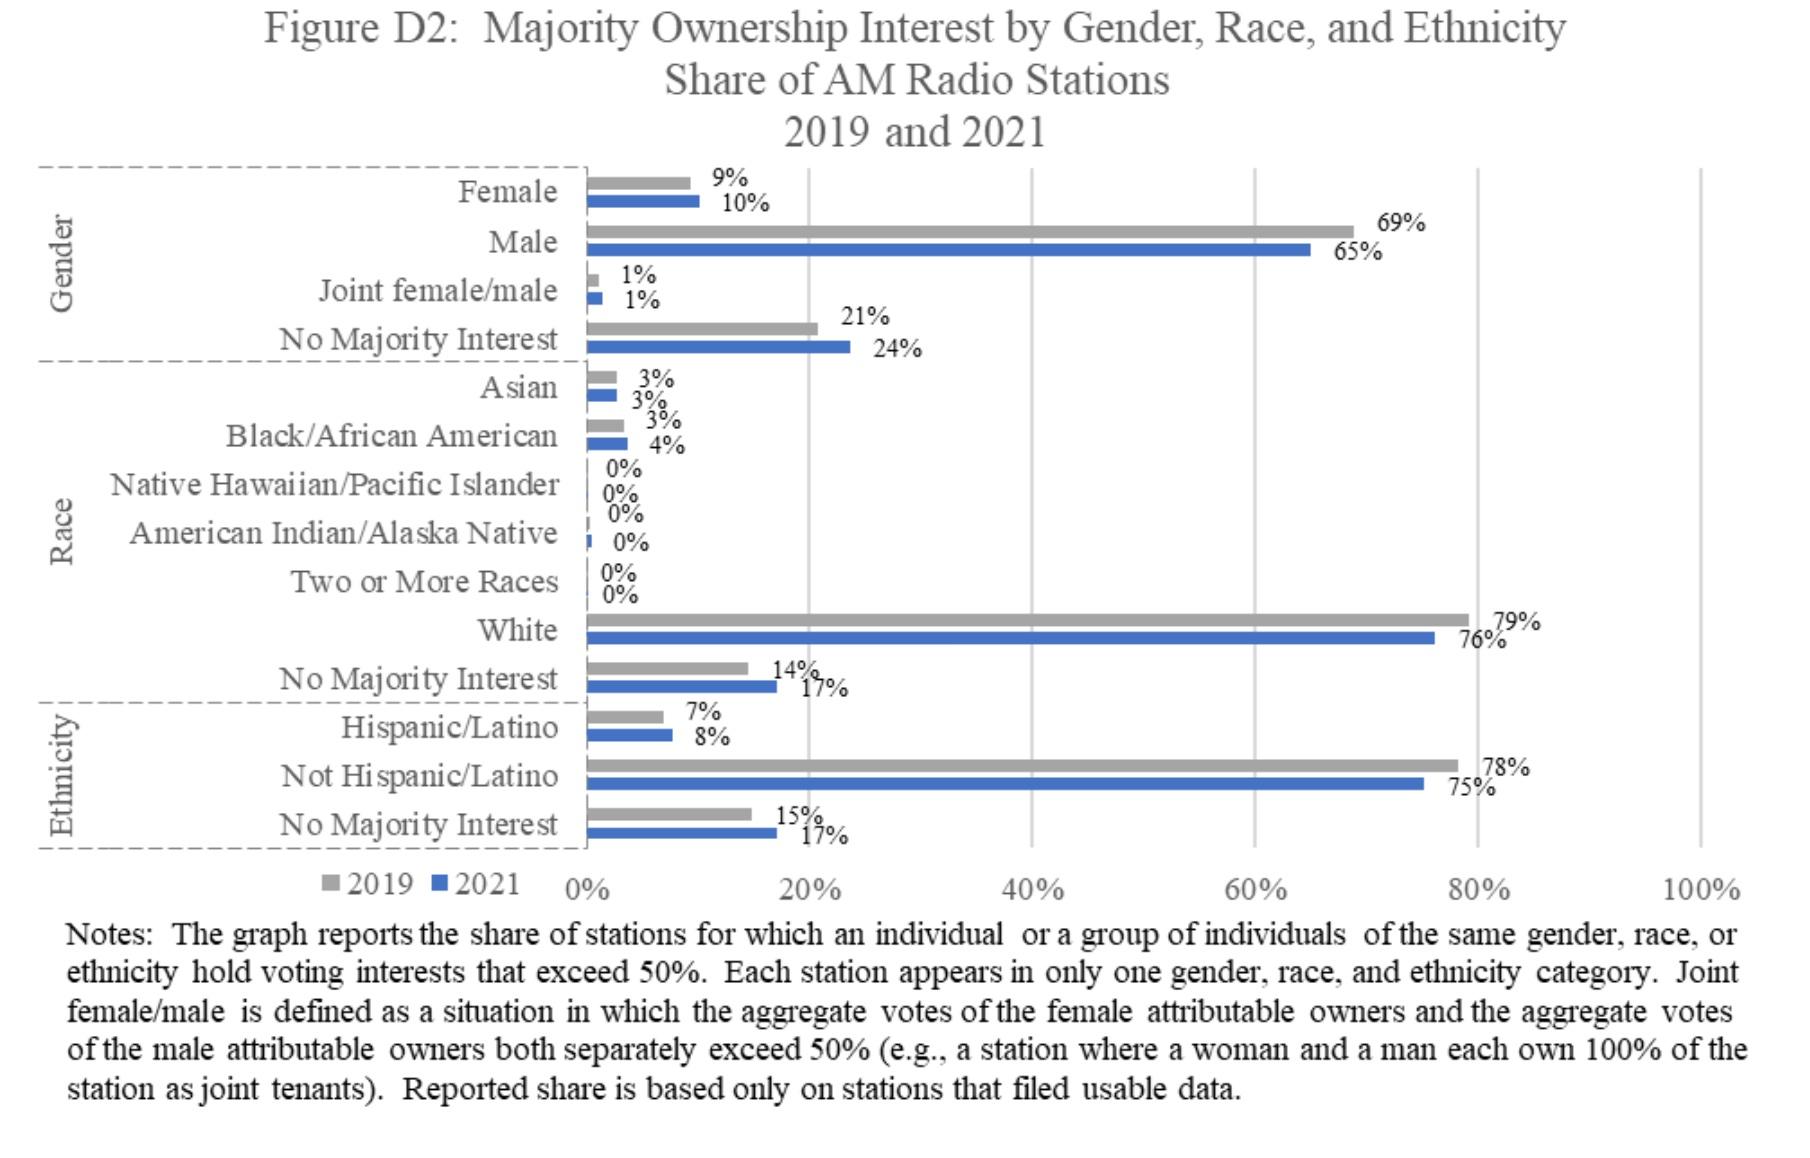 Majority Ownership Interest by Gender, Race, and Ethnicity Share of AM Radio Stations